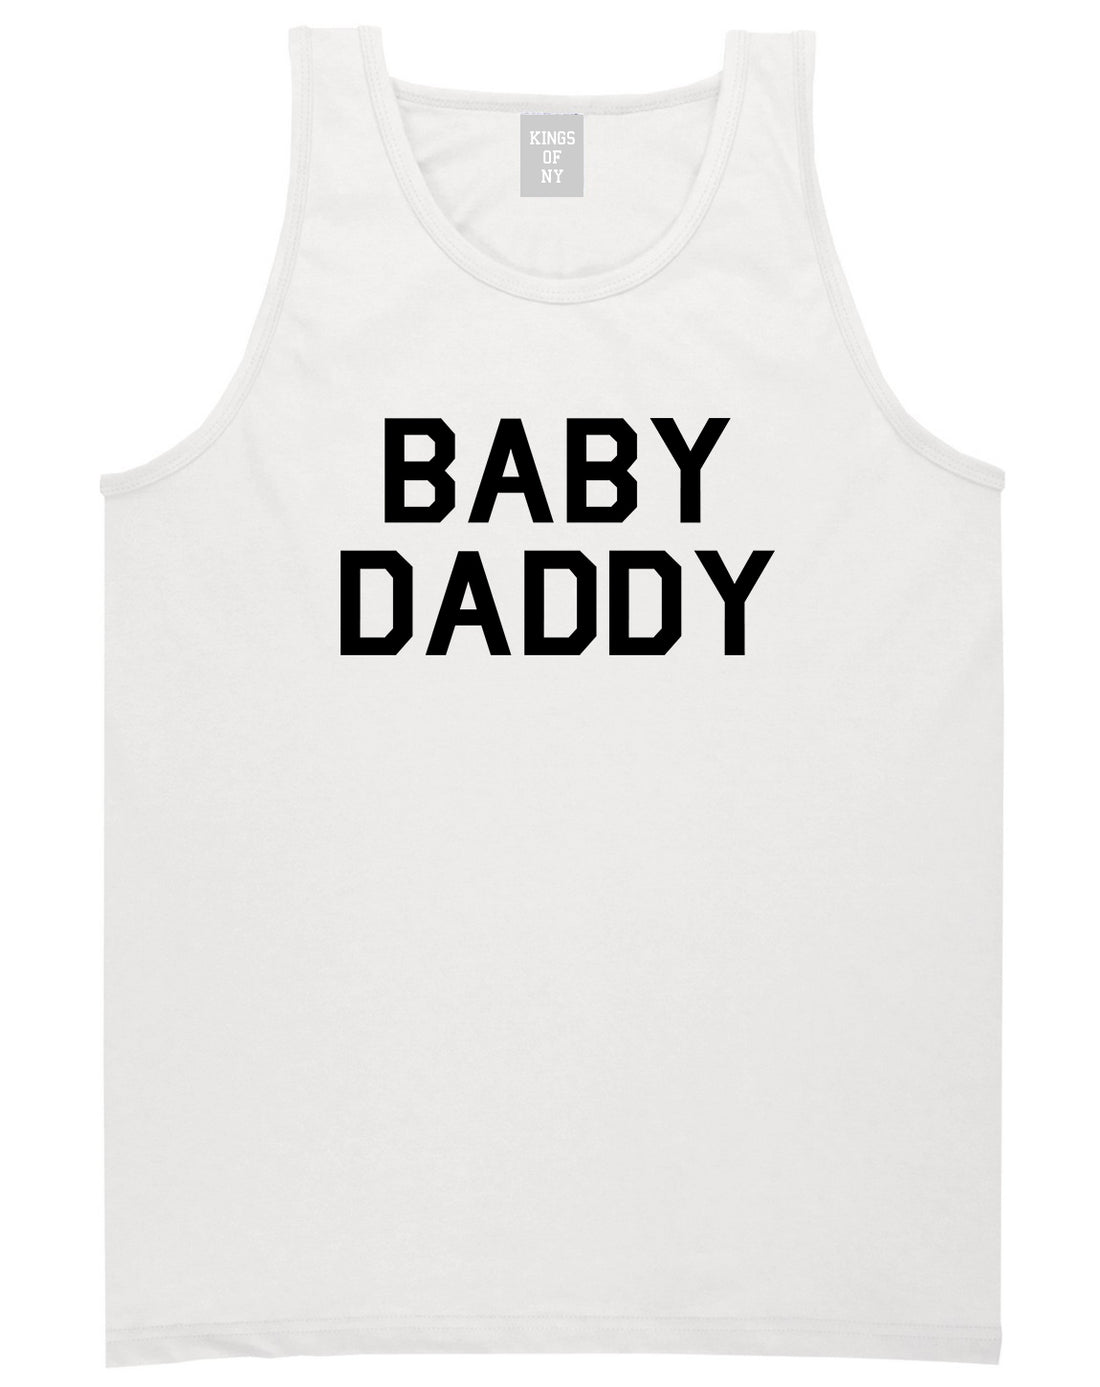 Baby Daddy Funny Fathers Day Mens Tank Top Shirt White